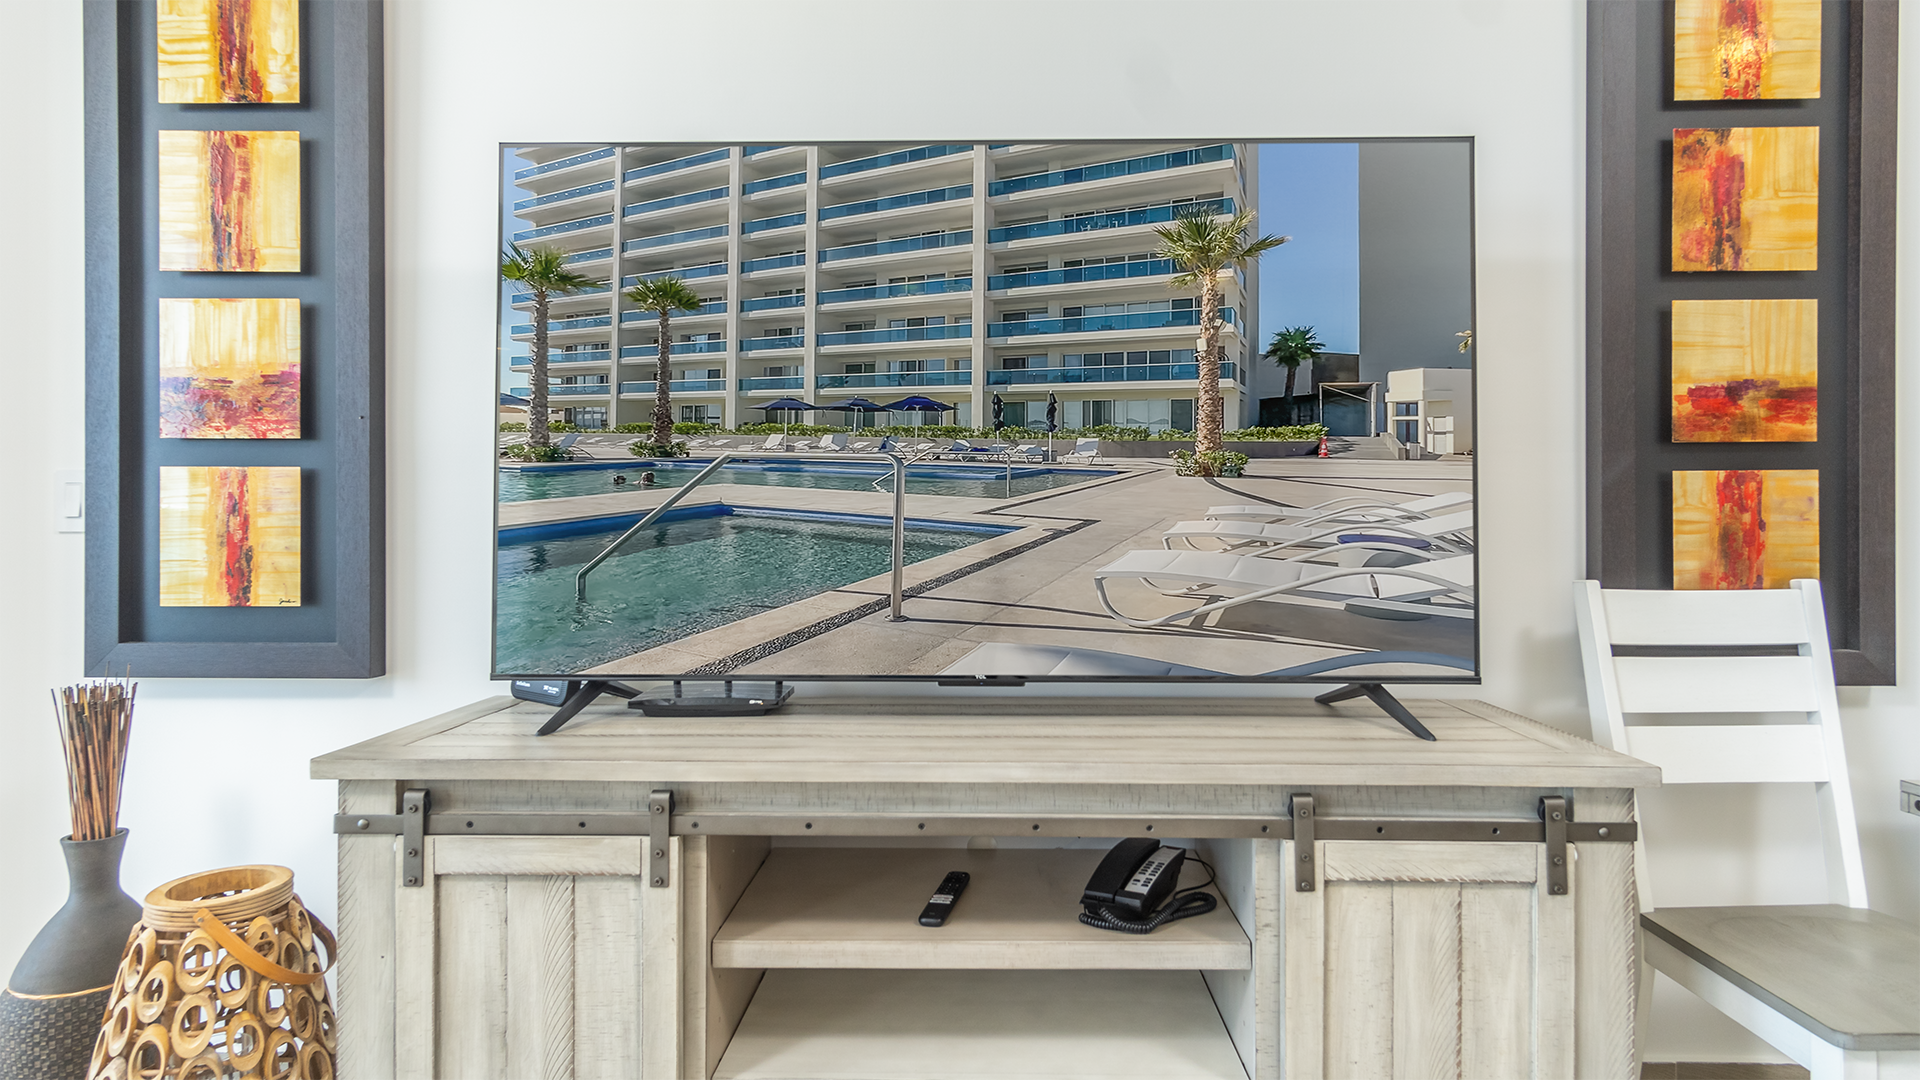 Large TV atop the entertainment center